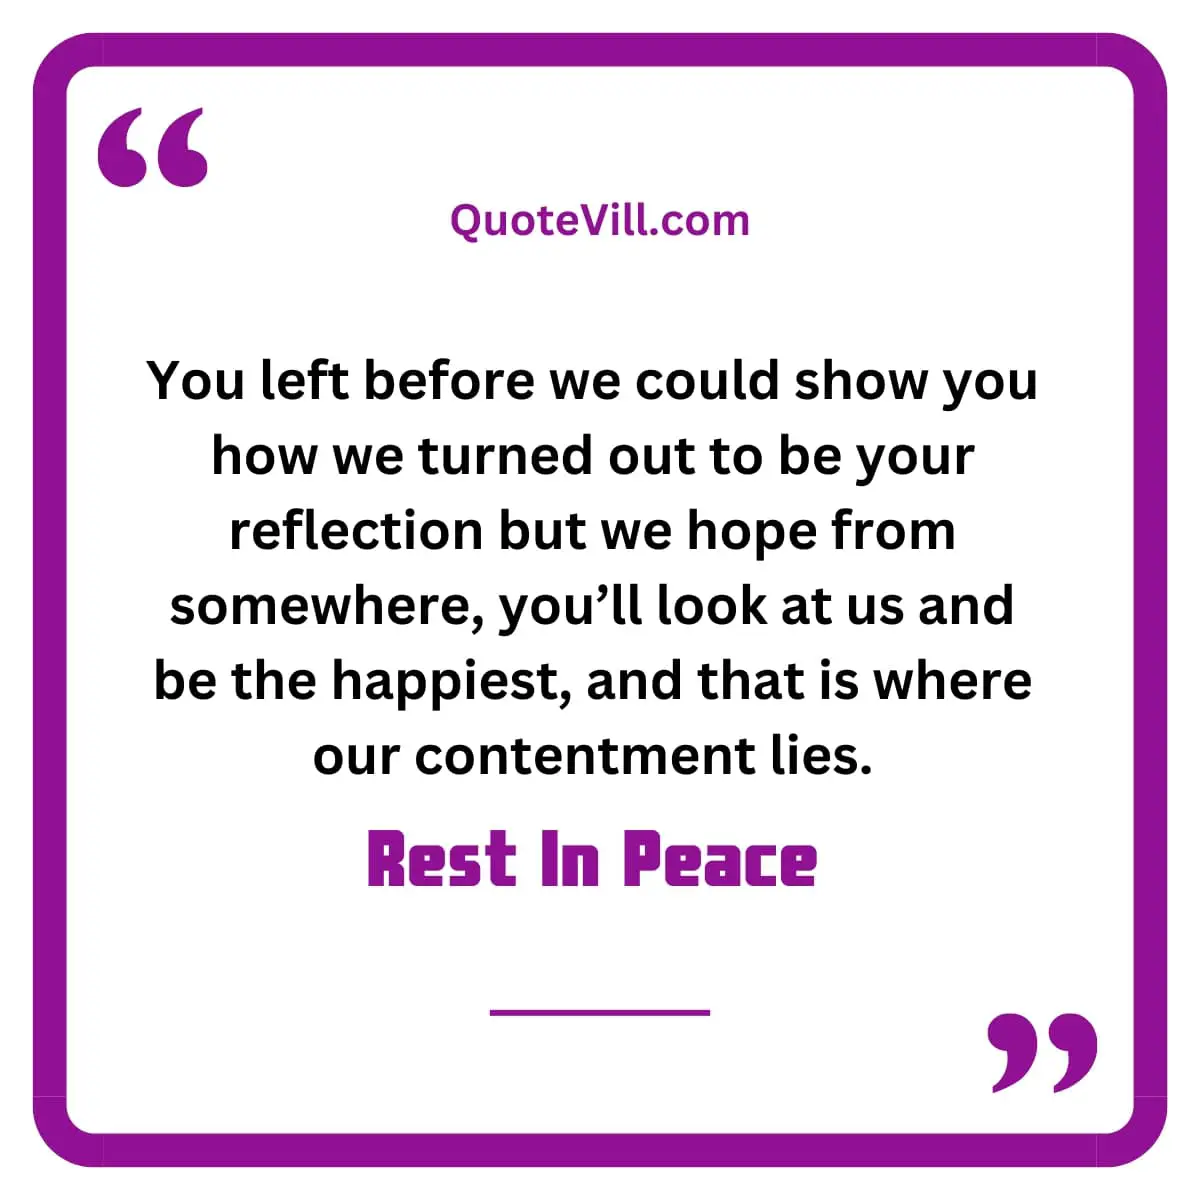 Death-Anniversary-Quotes-for-Grandmother